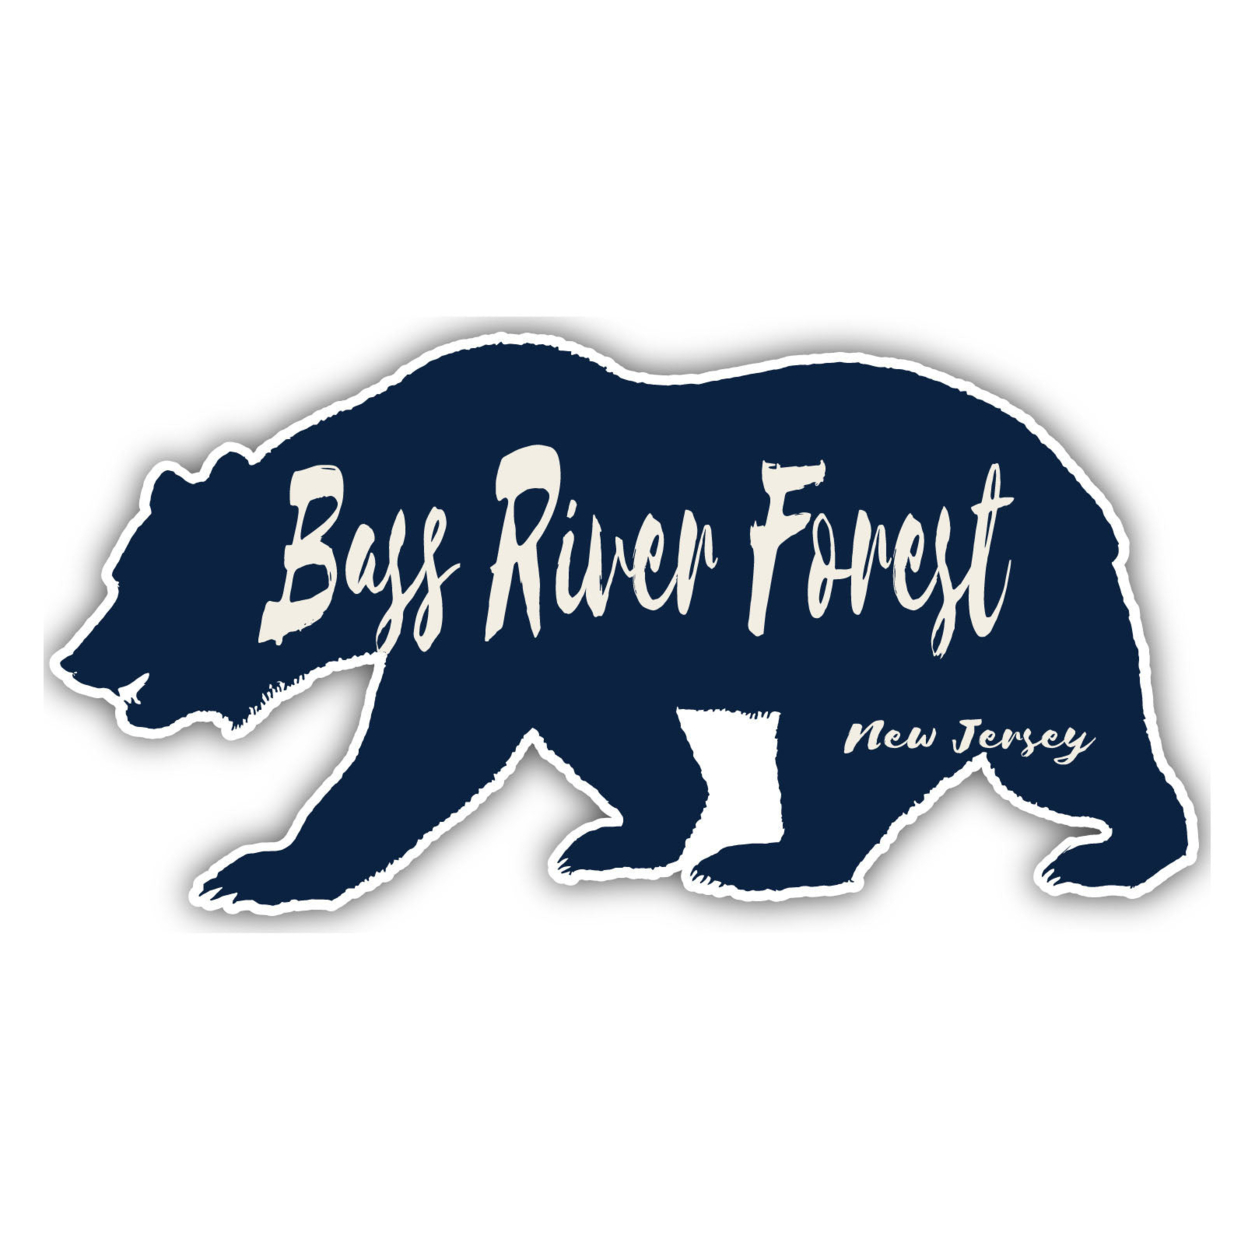 Bass River Forest New Jersey Souvenir Decorative Stickers (Choose Theme And Size) - 4-Pack, 10-Inch, Bear